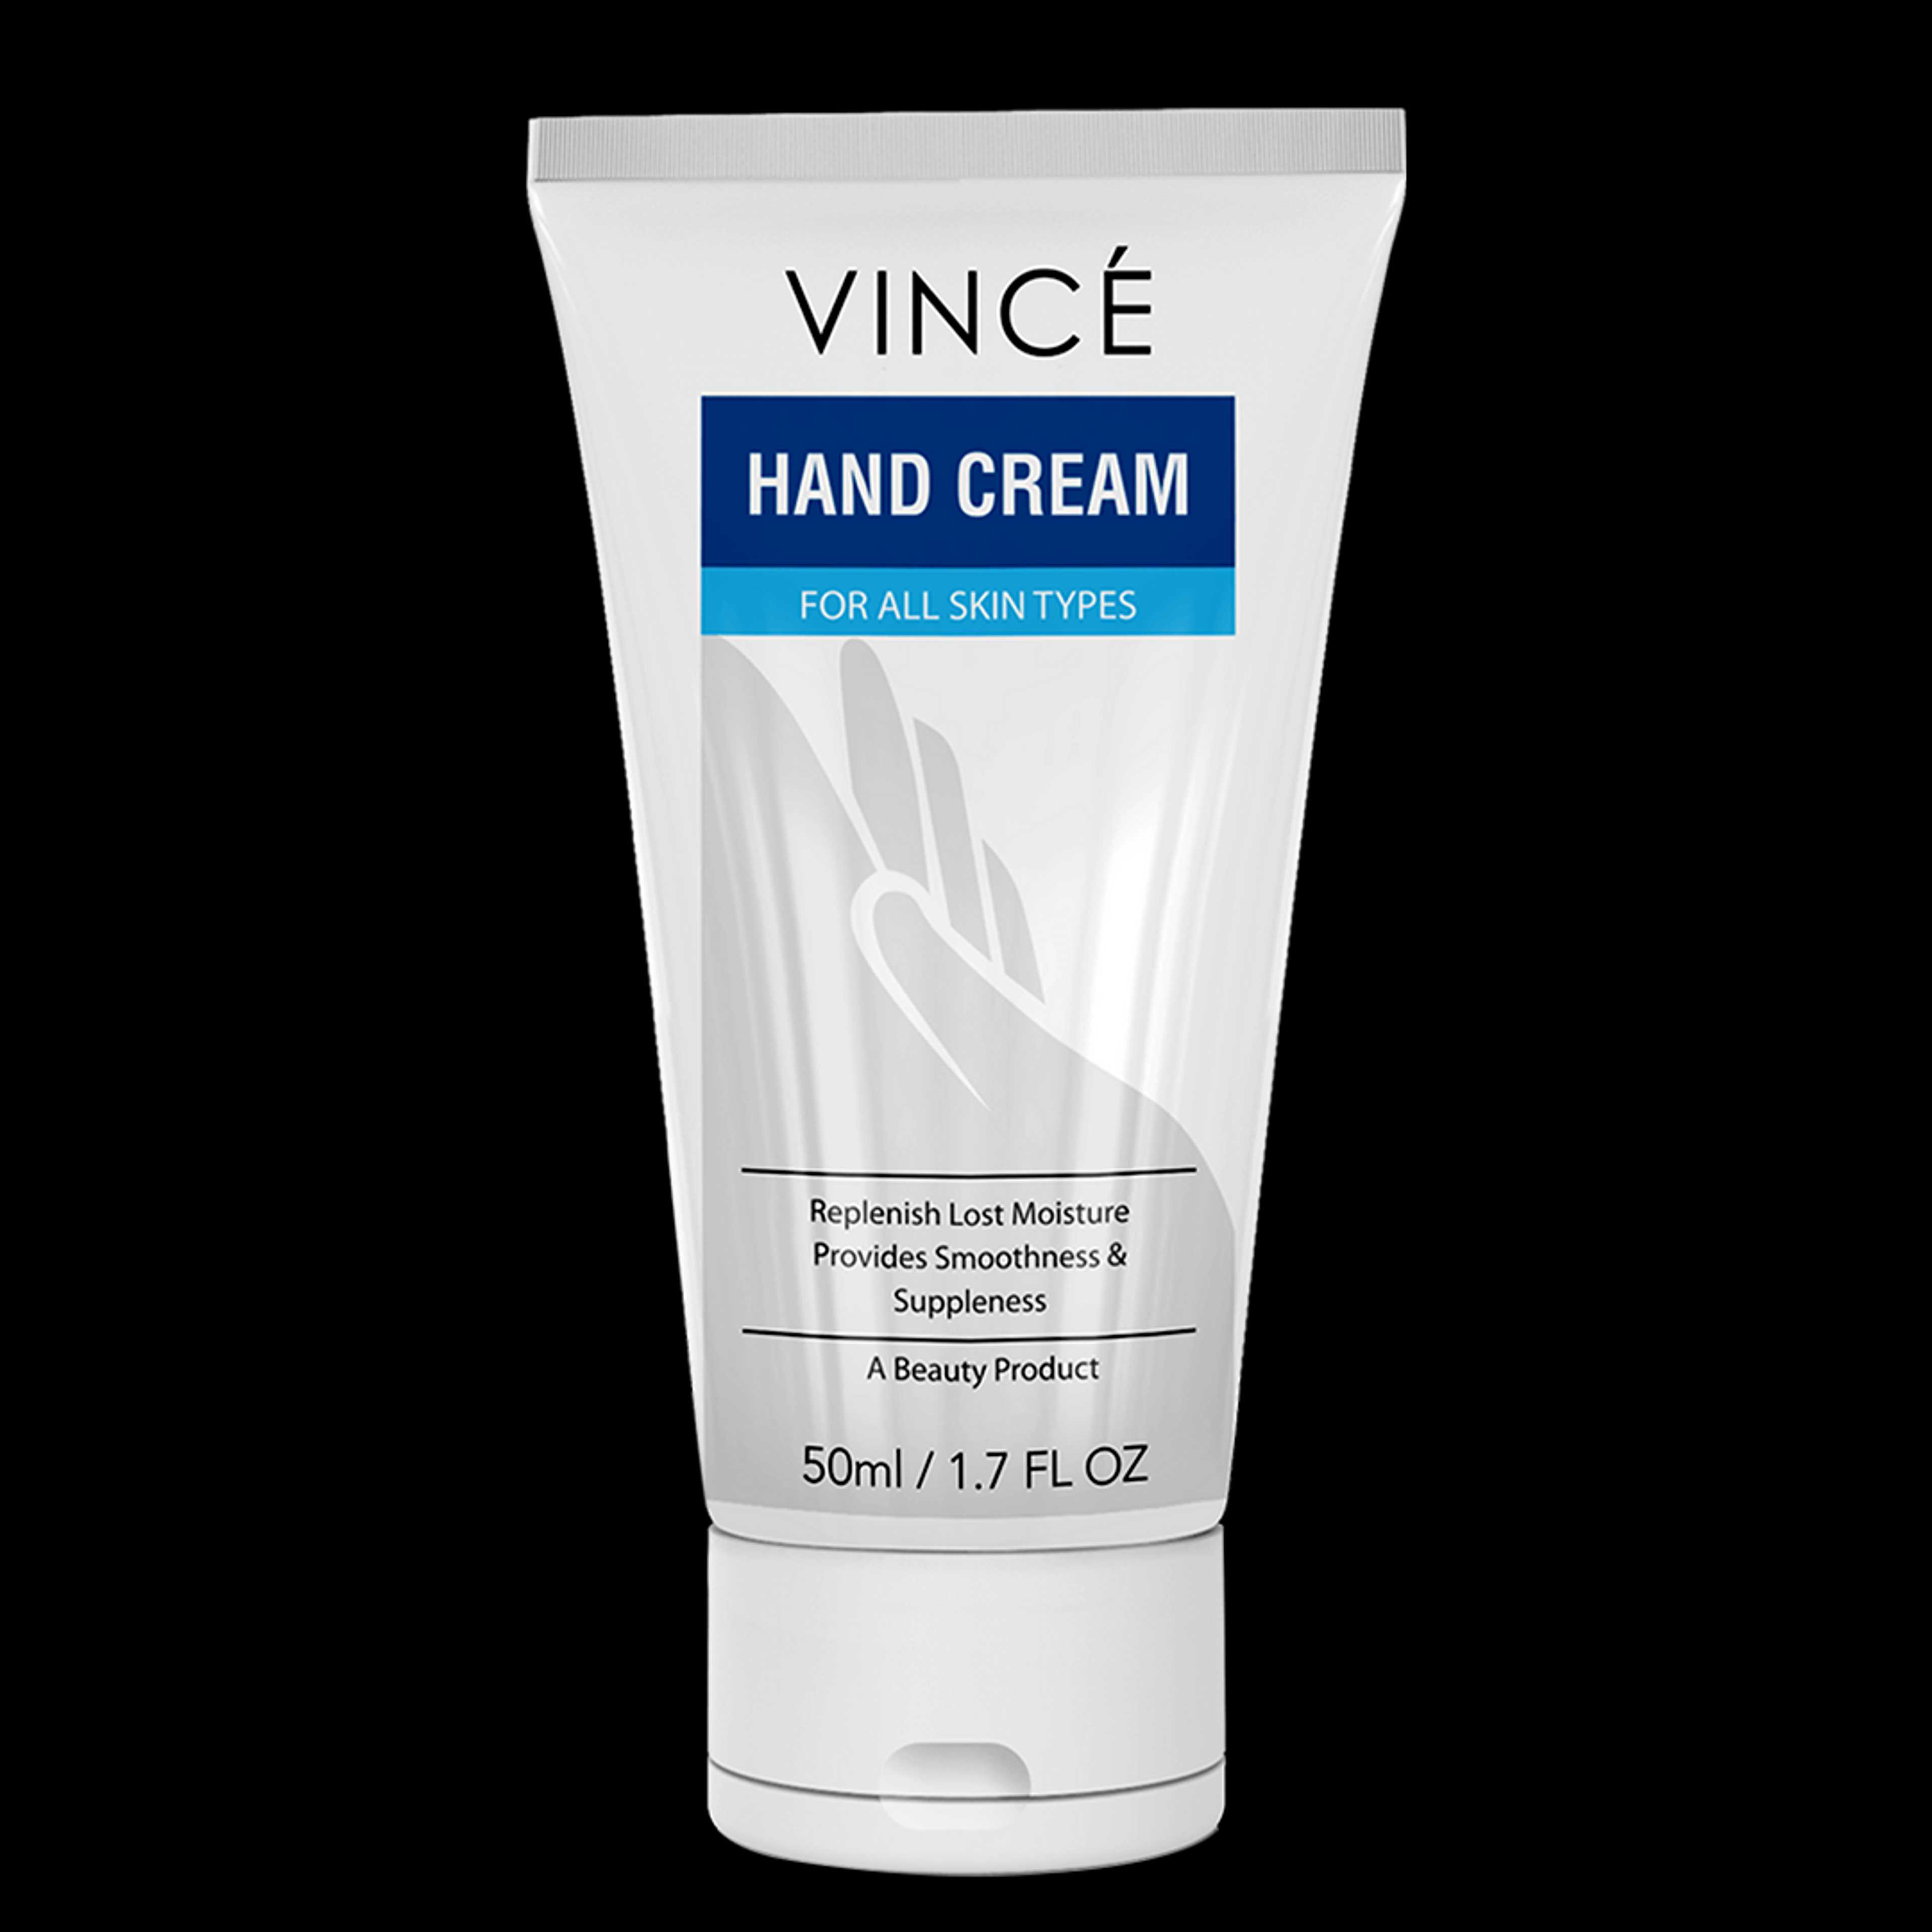 Vince_Hand Cream Replenish Lost Moisture Provides smoothness and Suppliness For All Skin Type By Vince_50ML